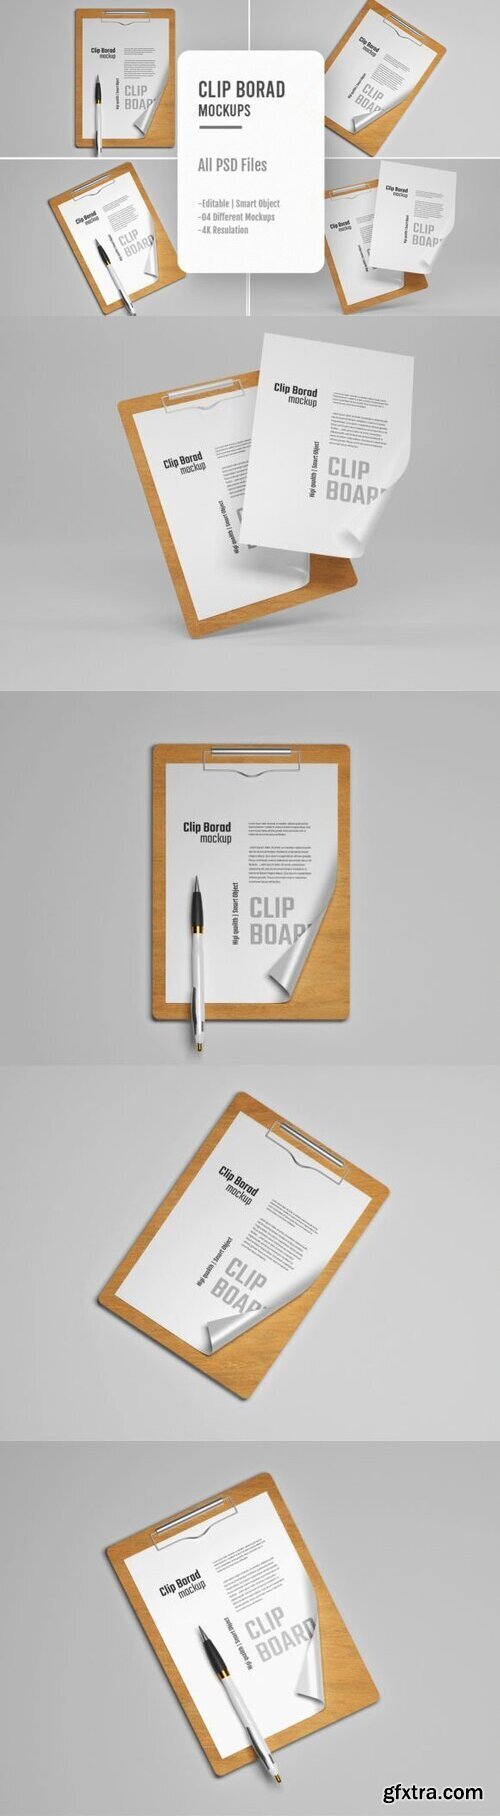 04 PSD Clipboard with Paper Mockups